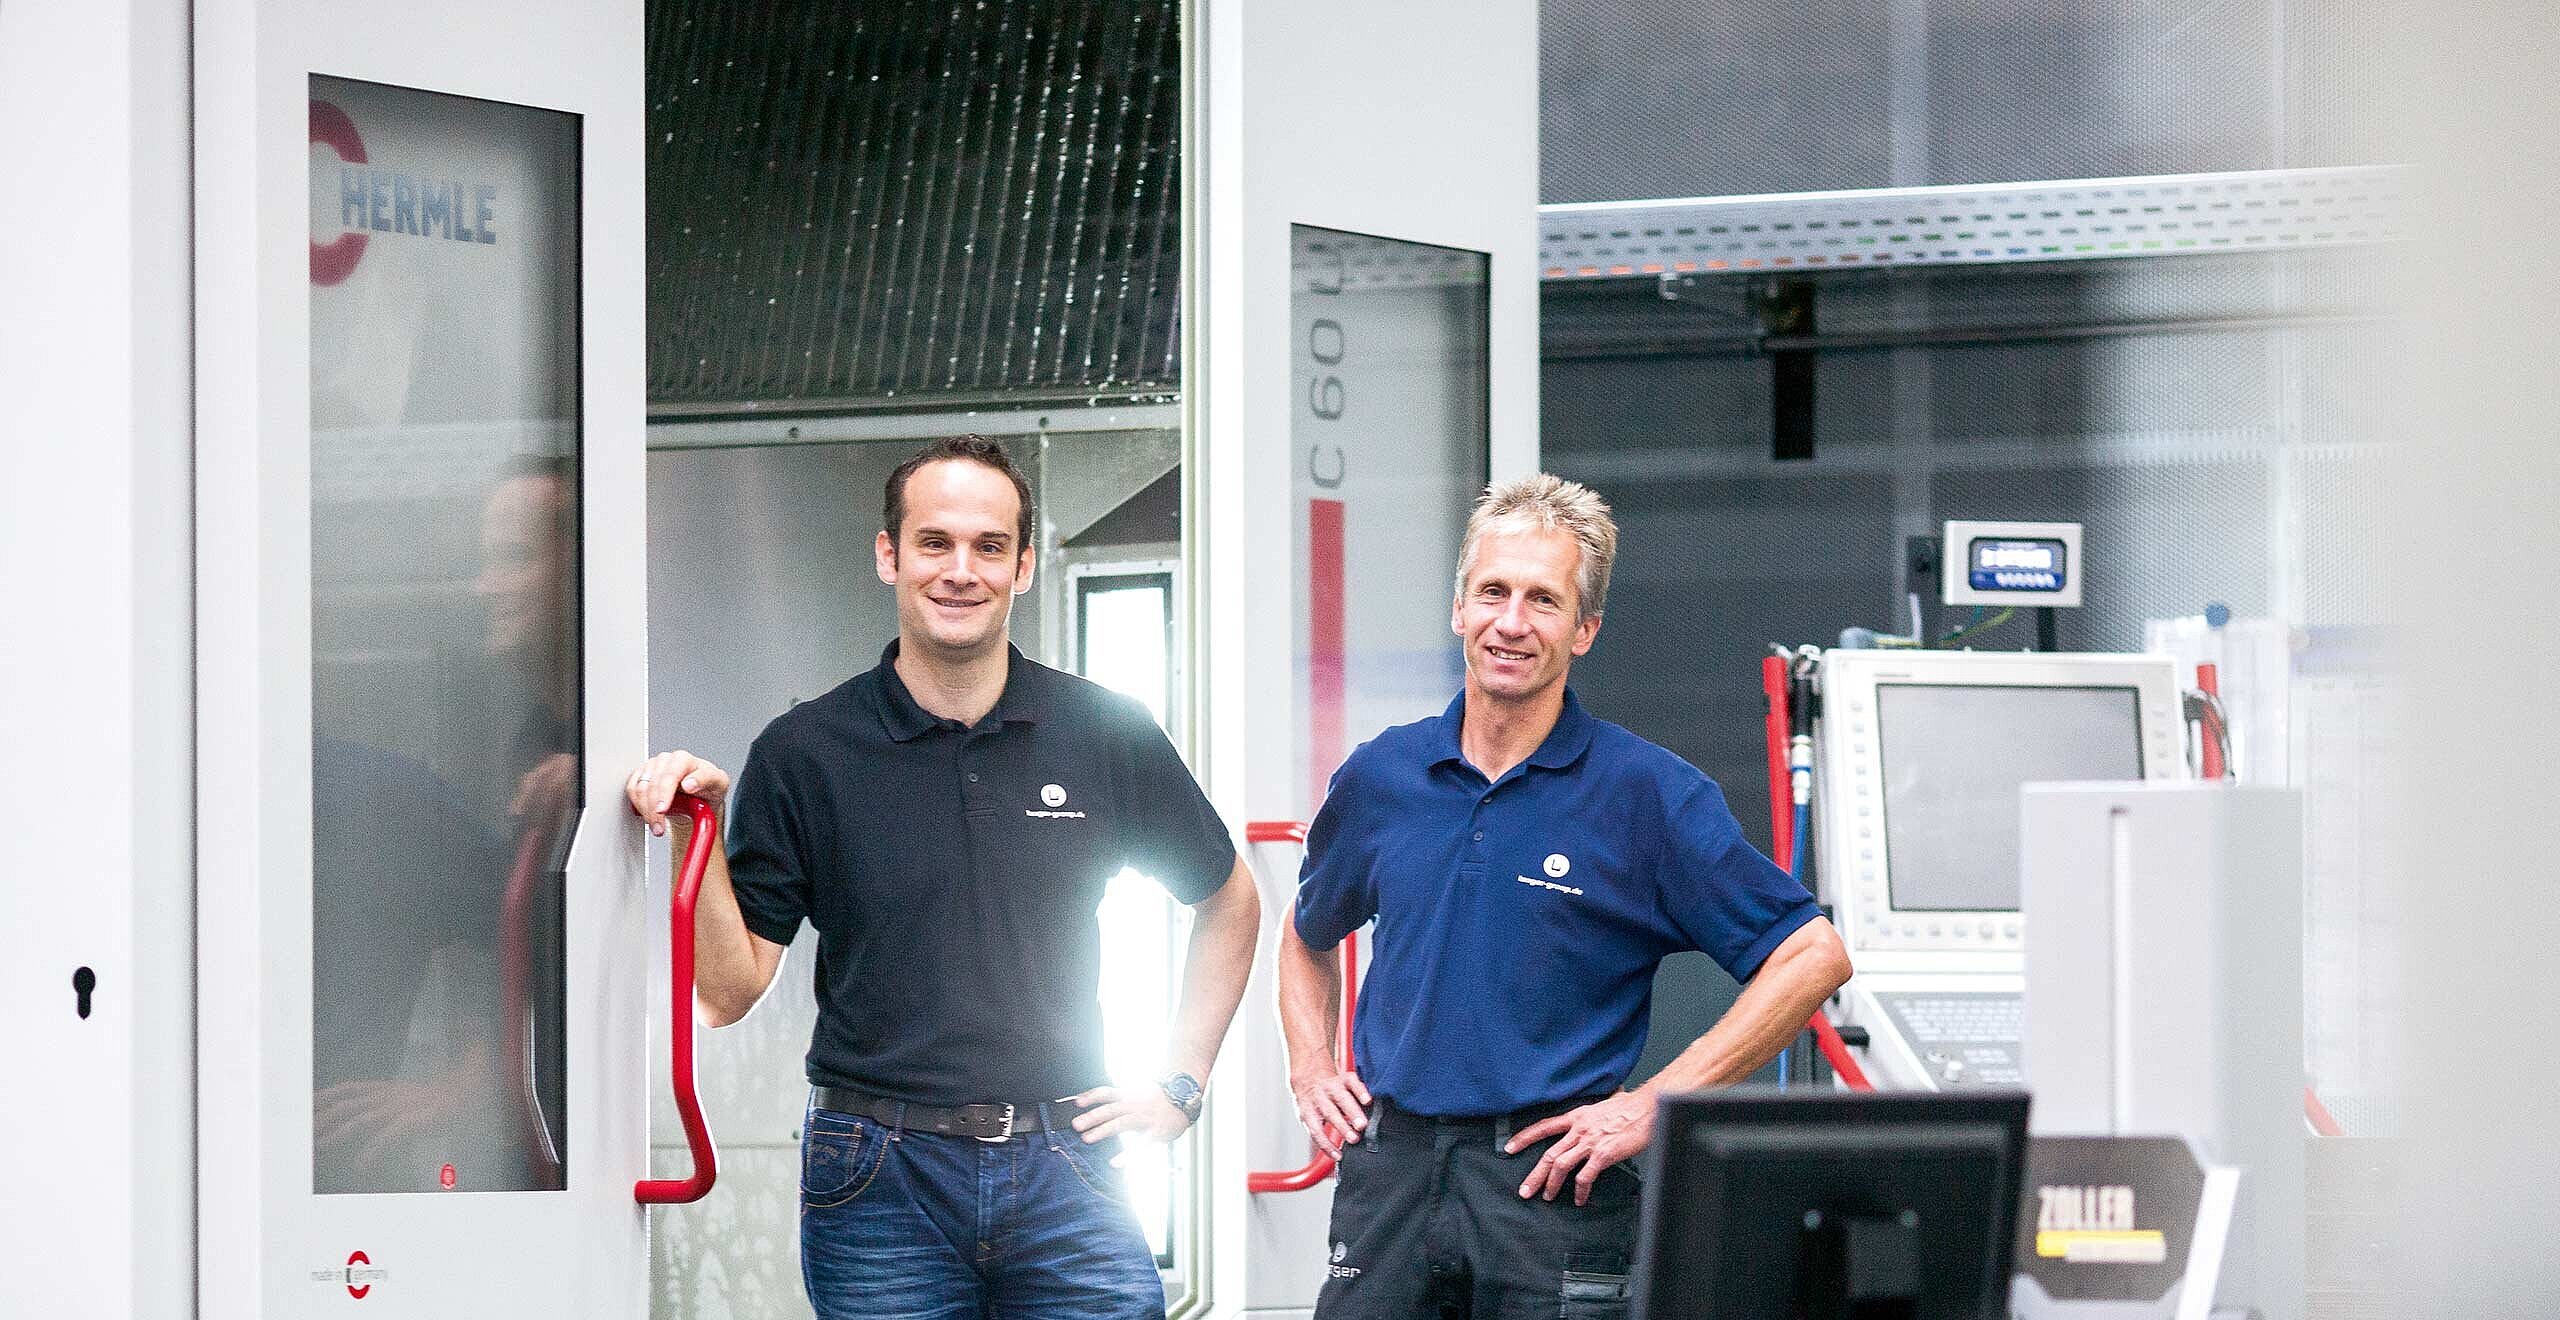 Jörg Lehmann, team leader of NC production, and (right) Harald Schreiber, milling specialist and operator of the C 60 U machining centres, both from Langer GmbH & Co. KG